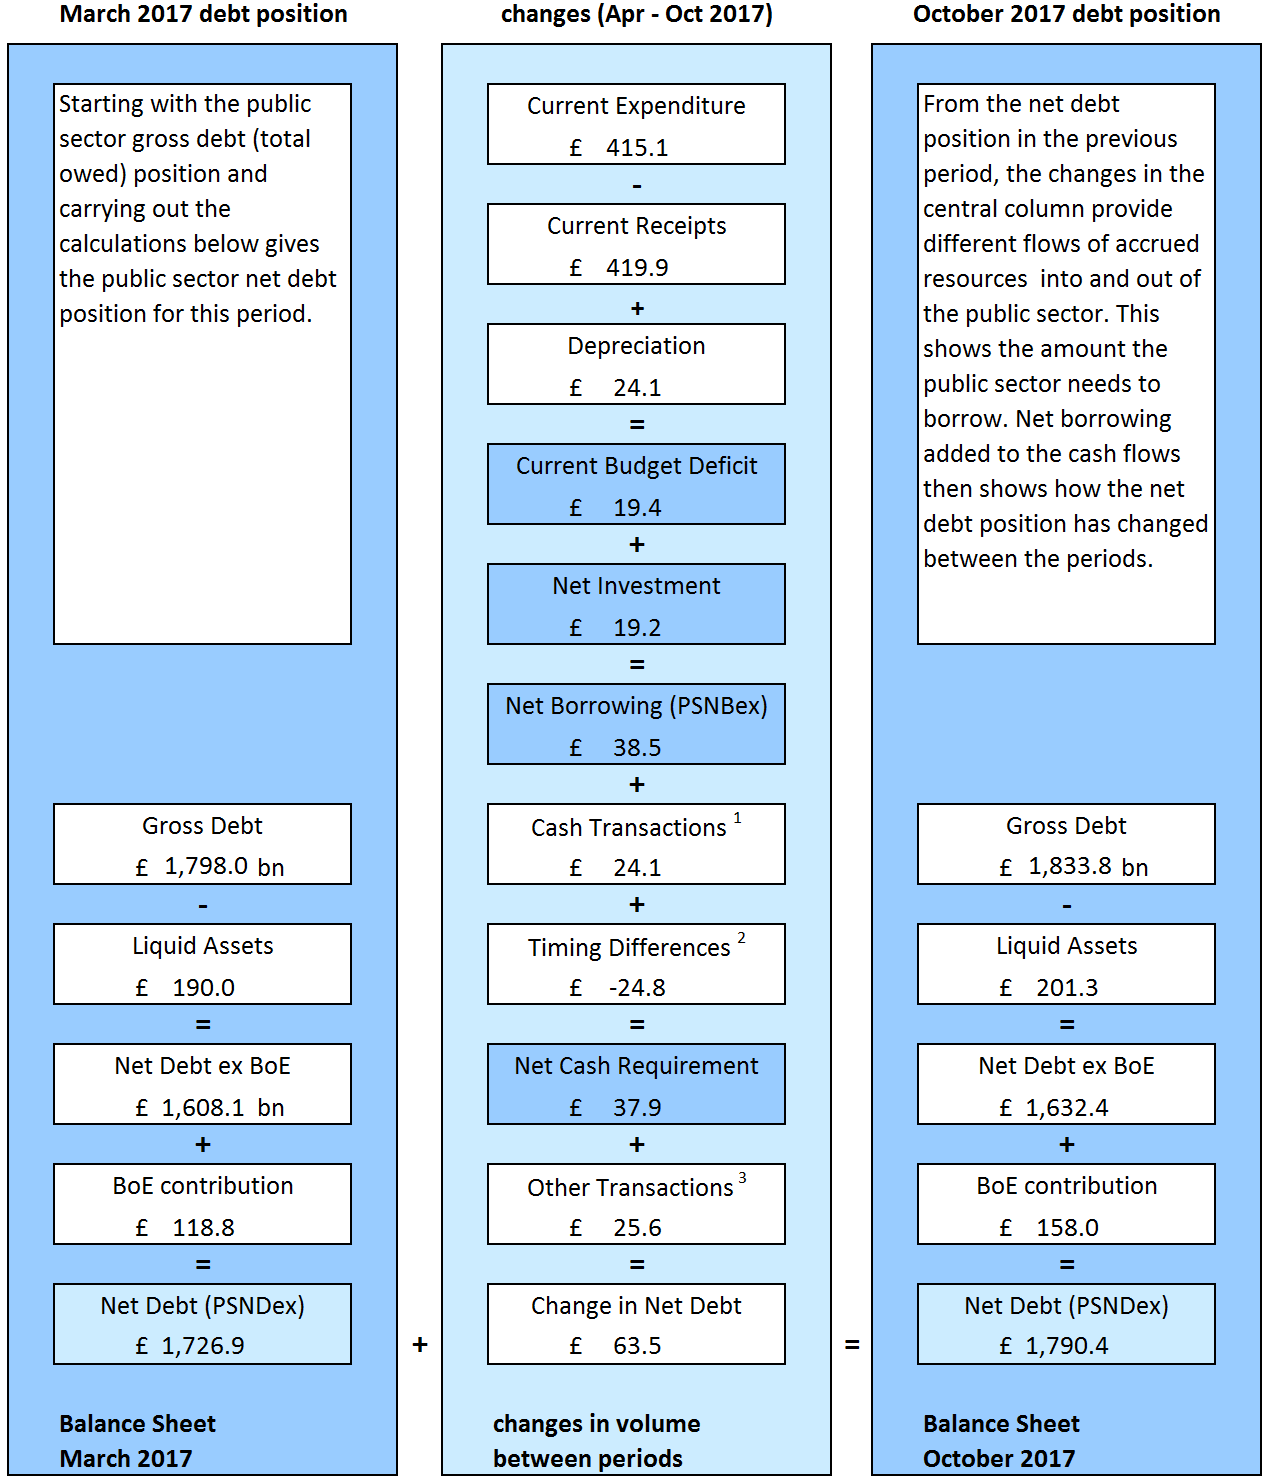 Diagram illustrates how the differences between income and spending (both current and capital) lead to the accumulation of debt in latest full financial year. 